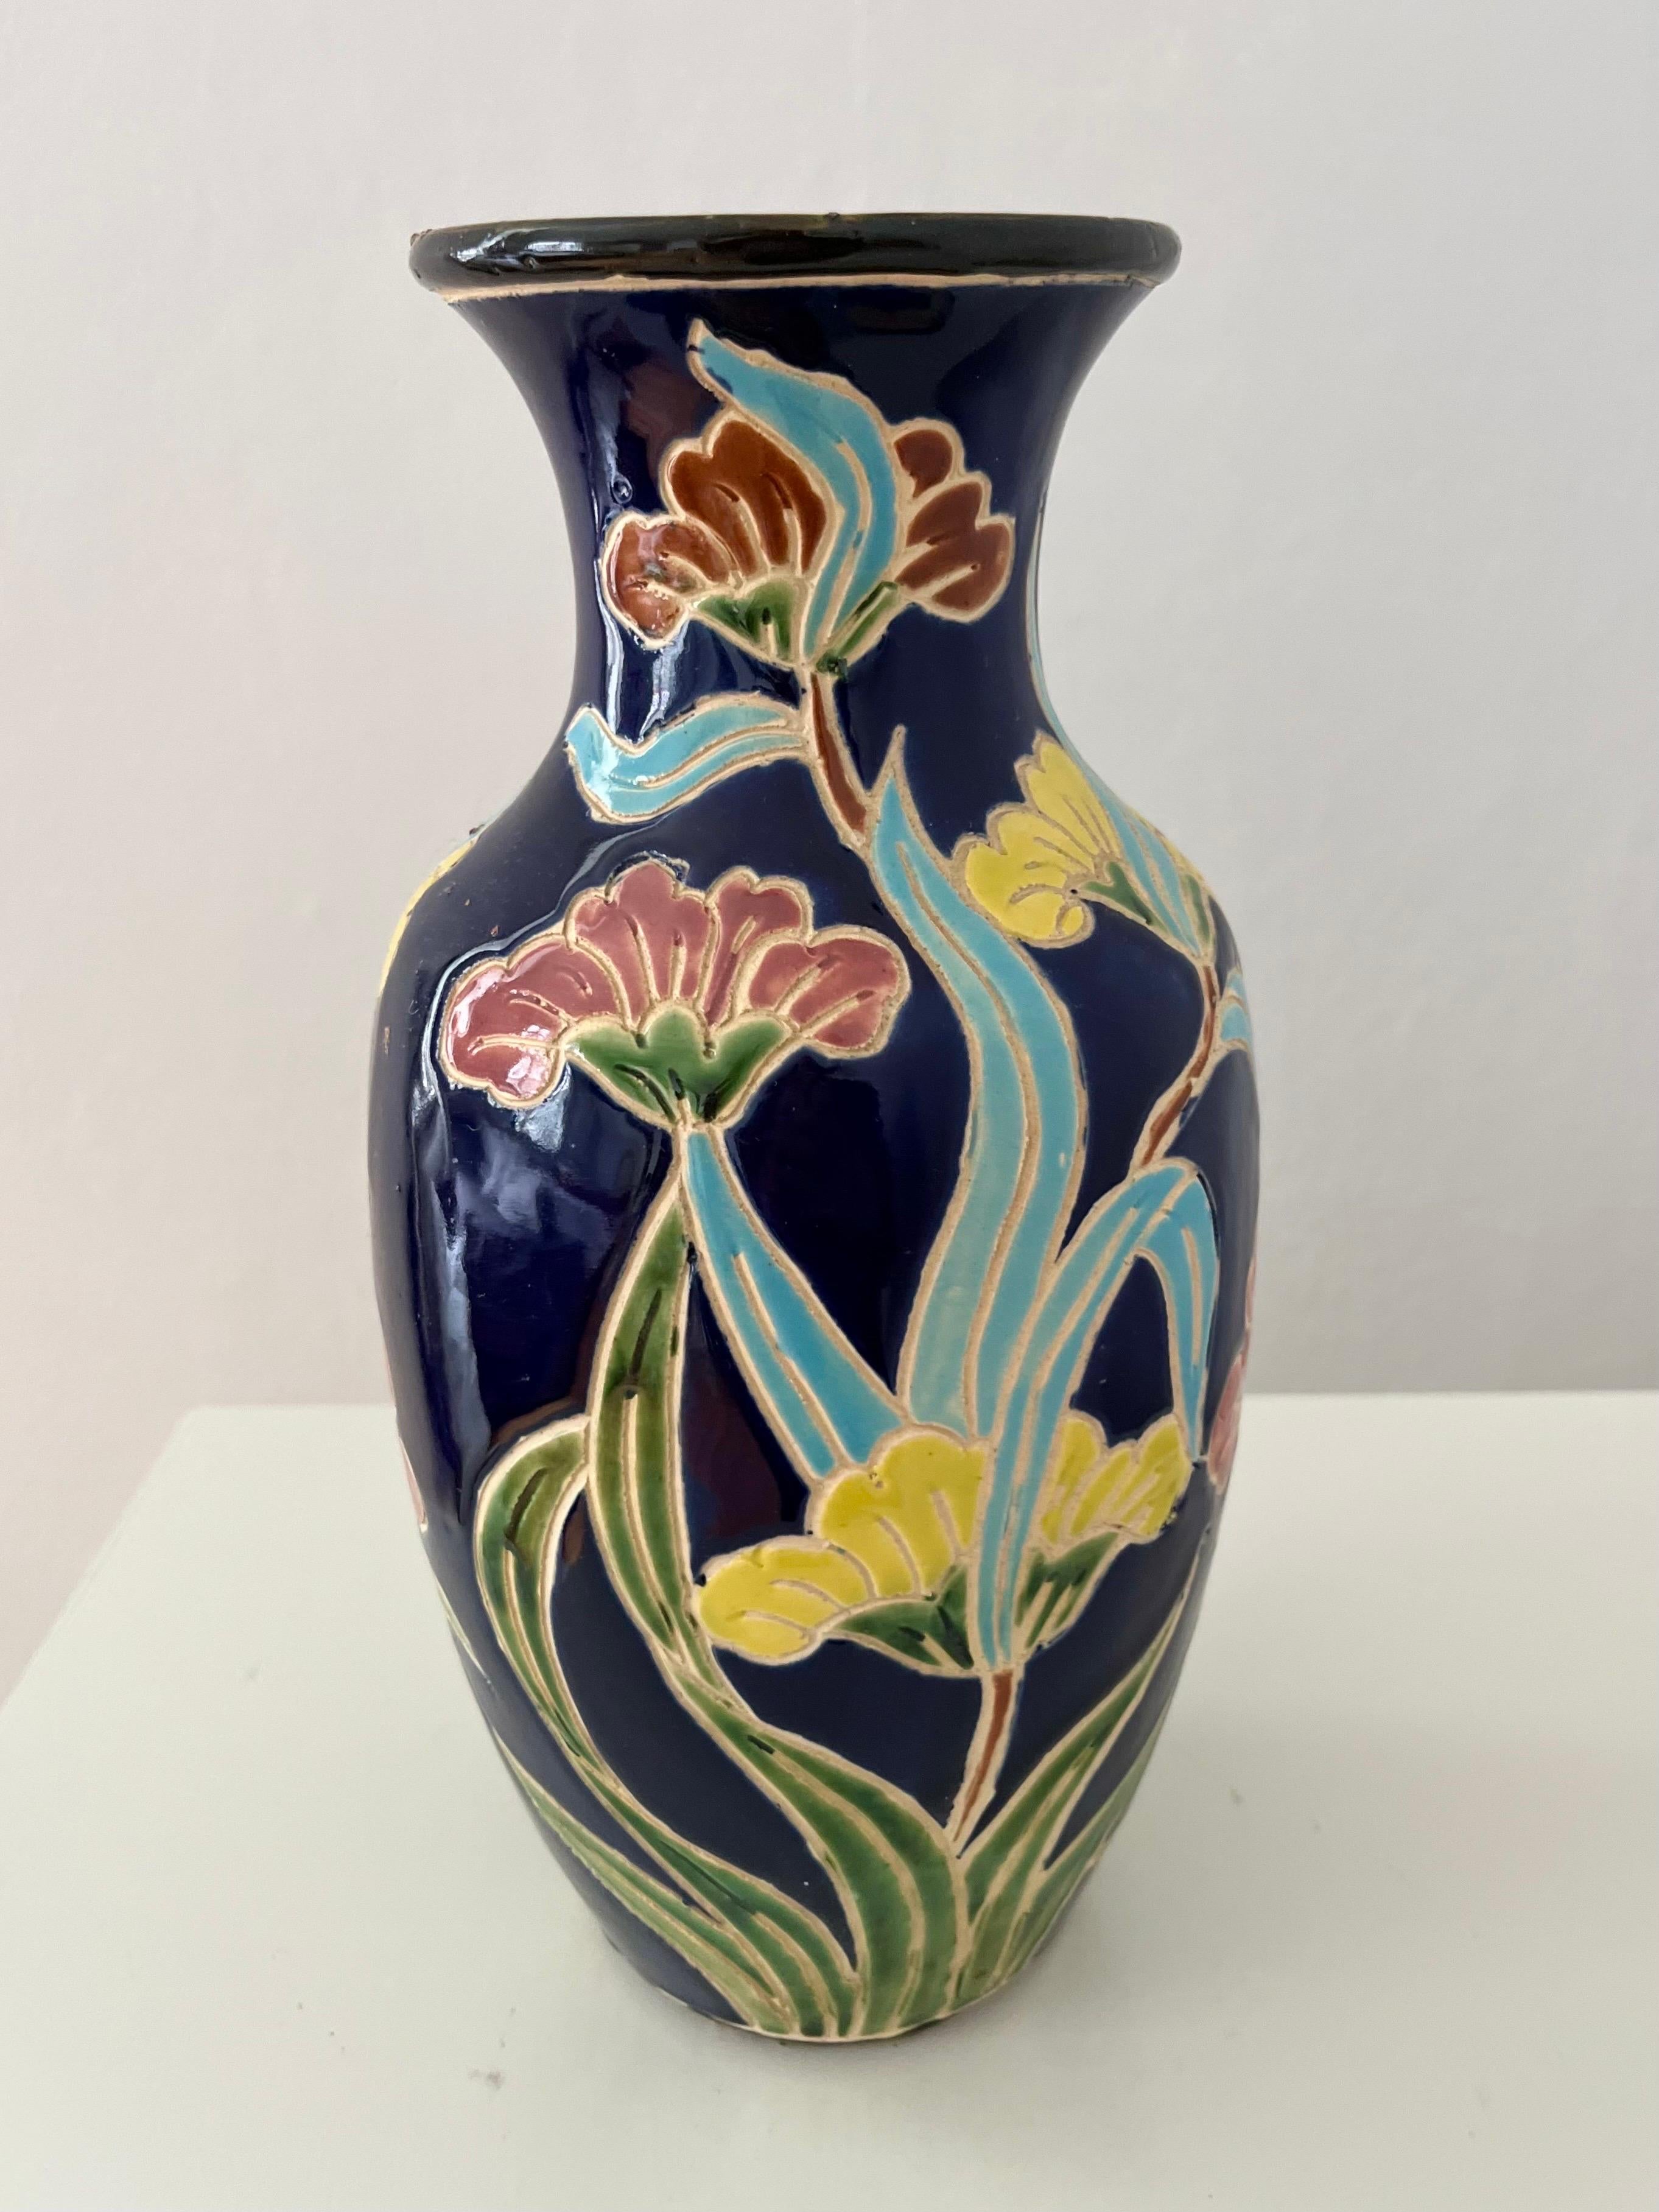 1960s/1970s Scandinavian Organic Modern Ceramic Vase with Colorful Floral Motifs For Sale 2